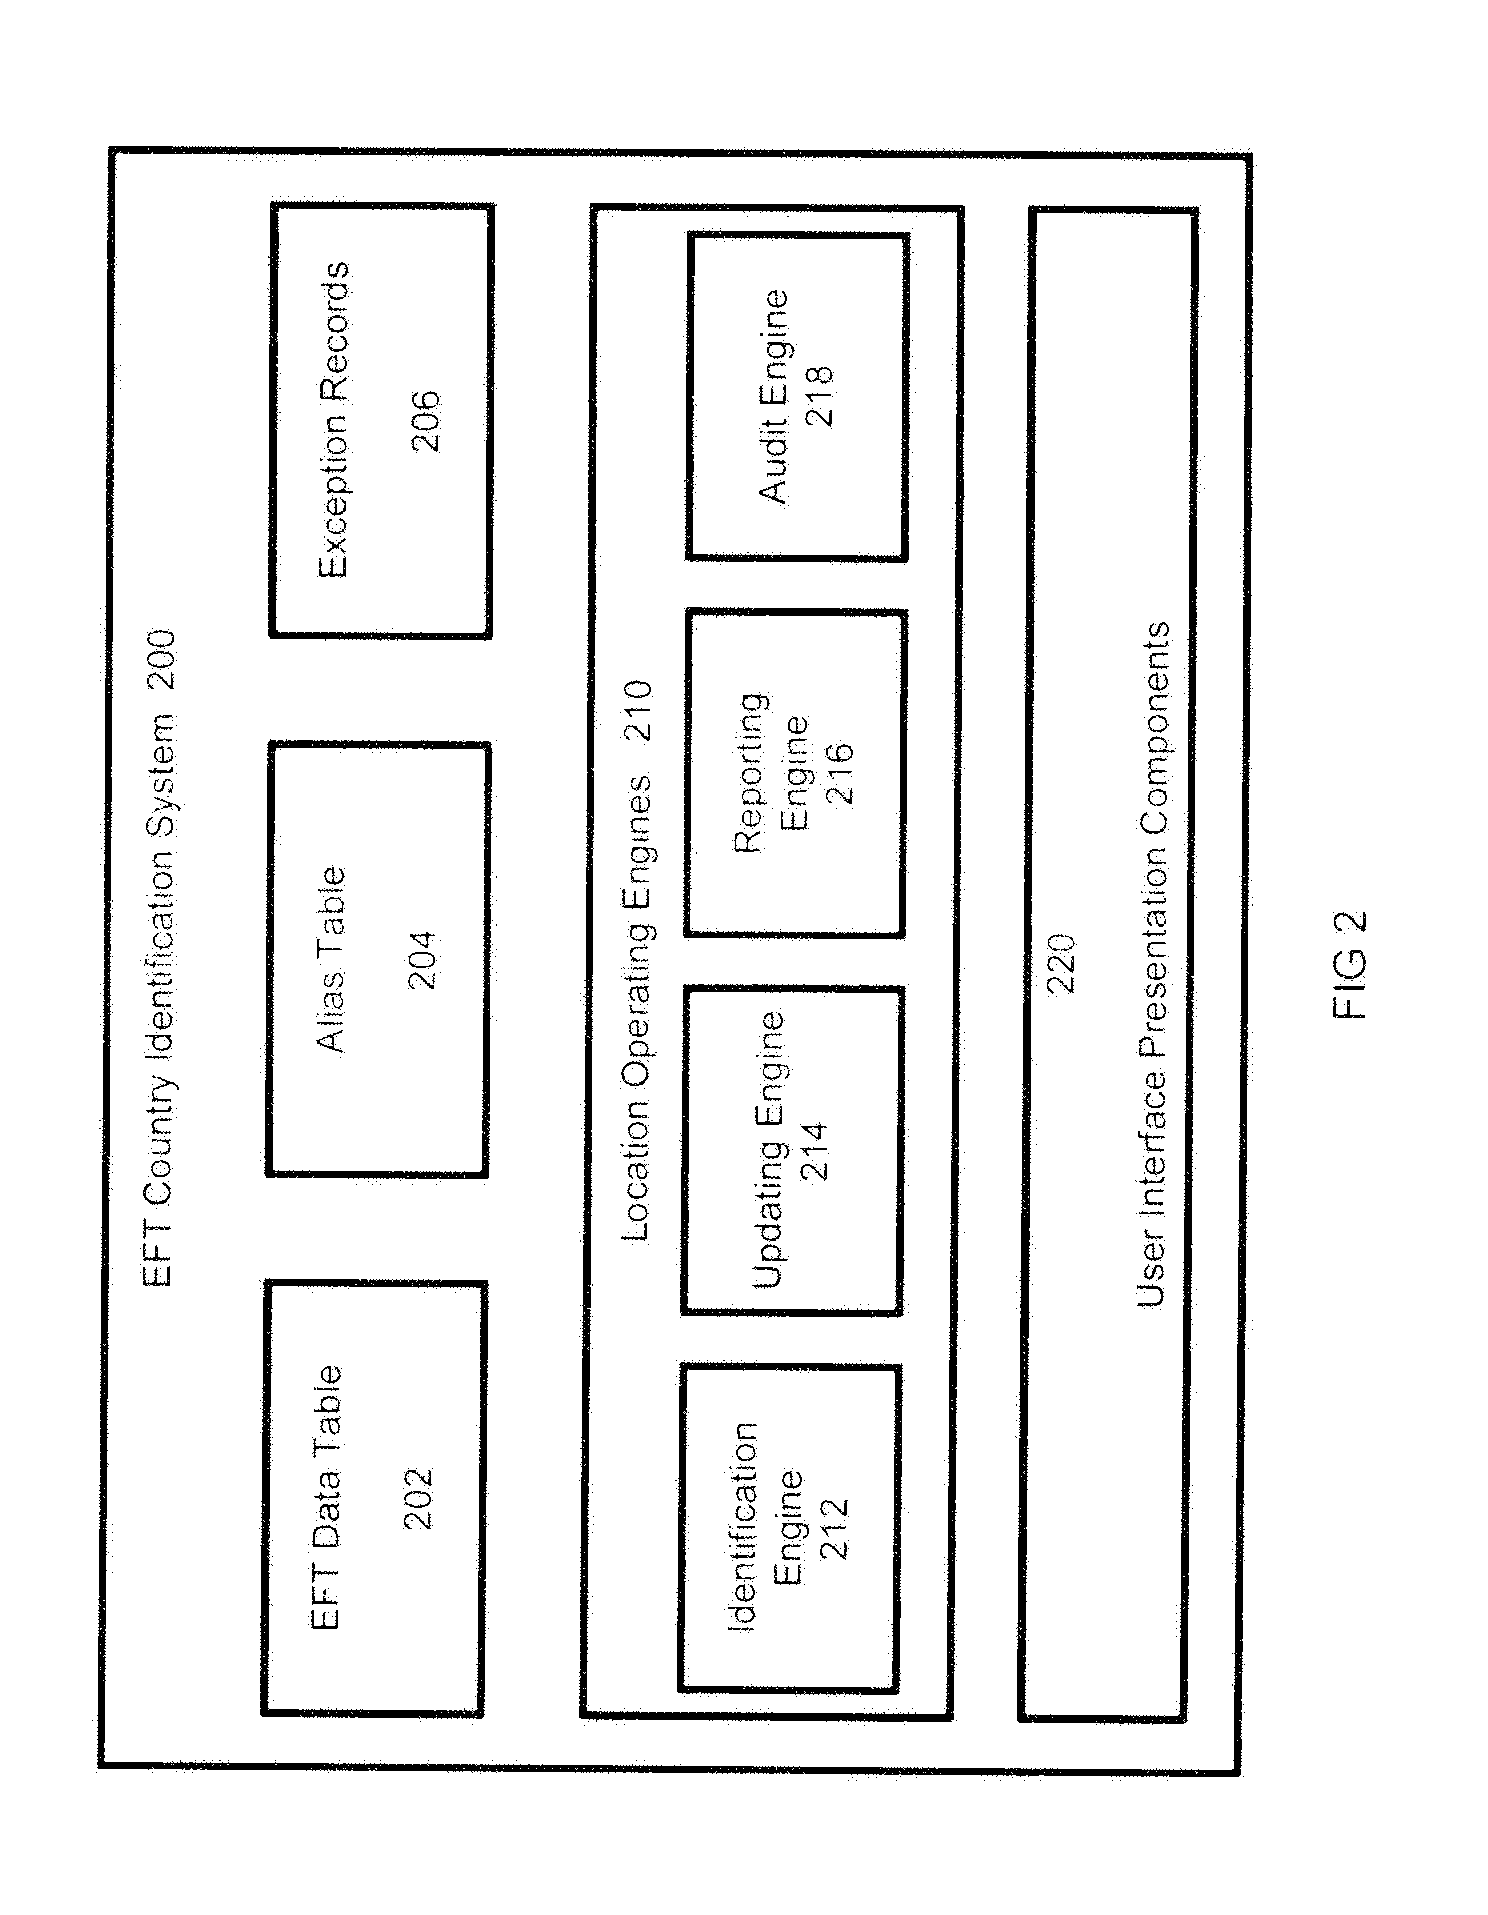 System and Method for Risk Evaluation in EFT Transactions